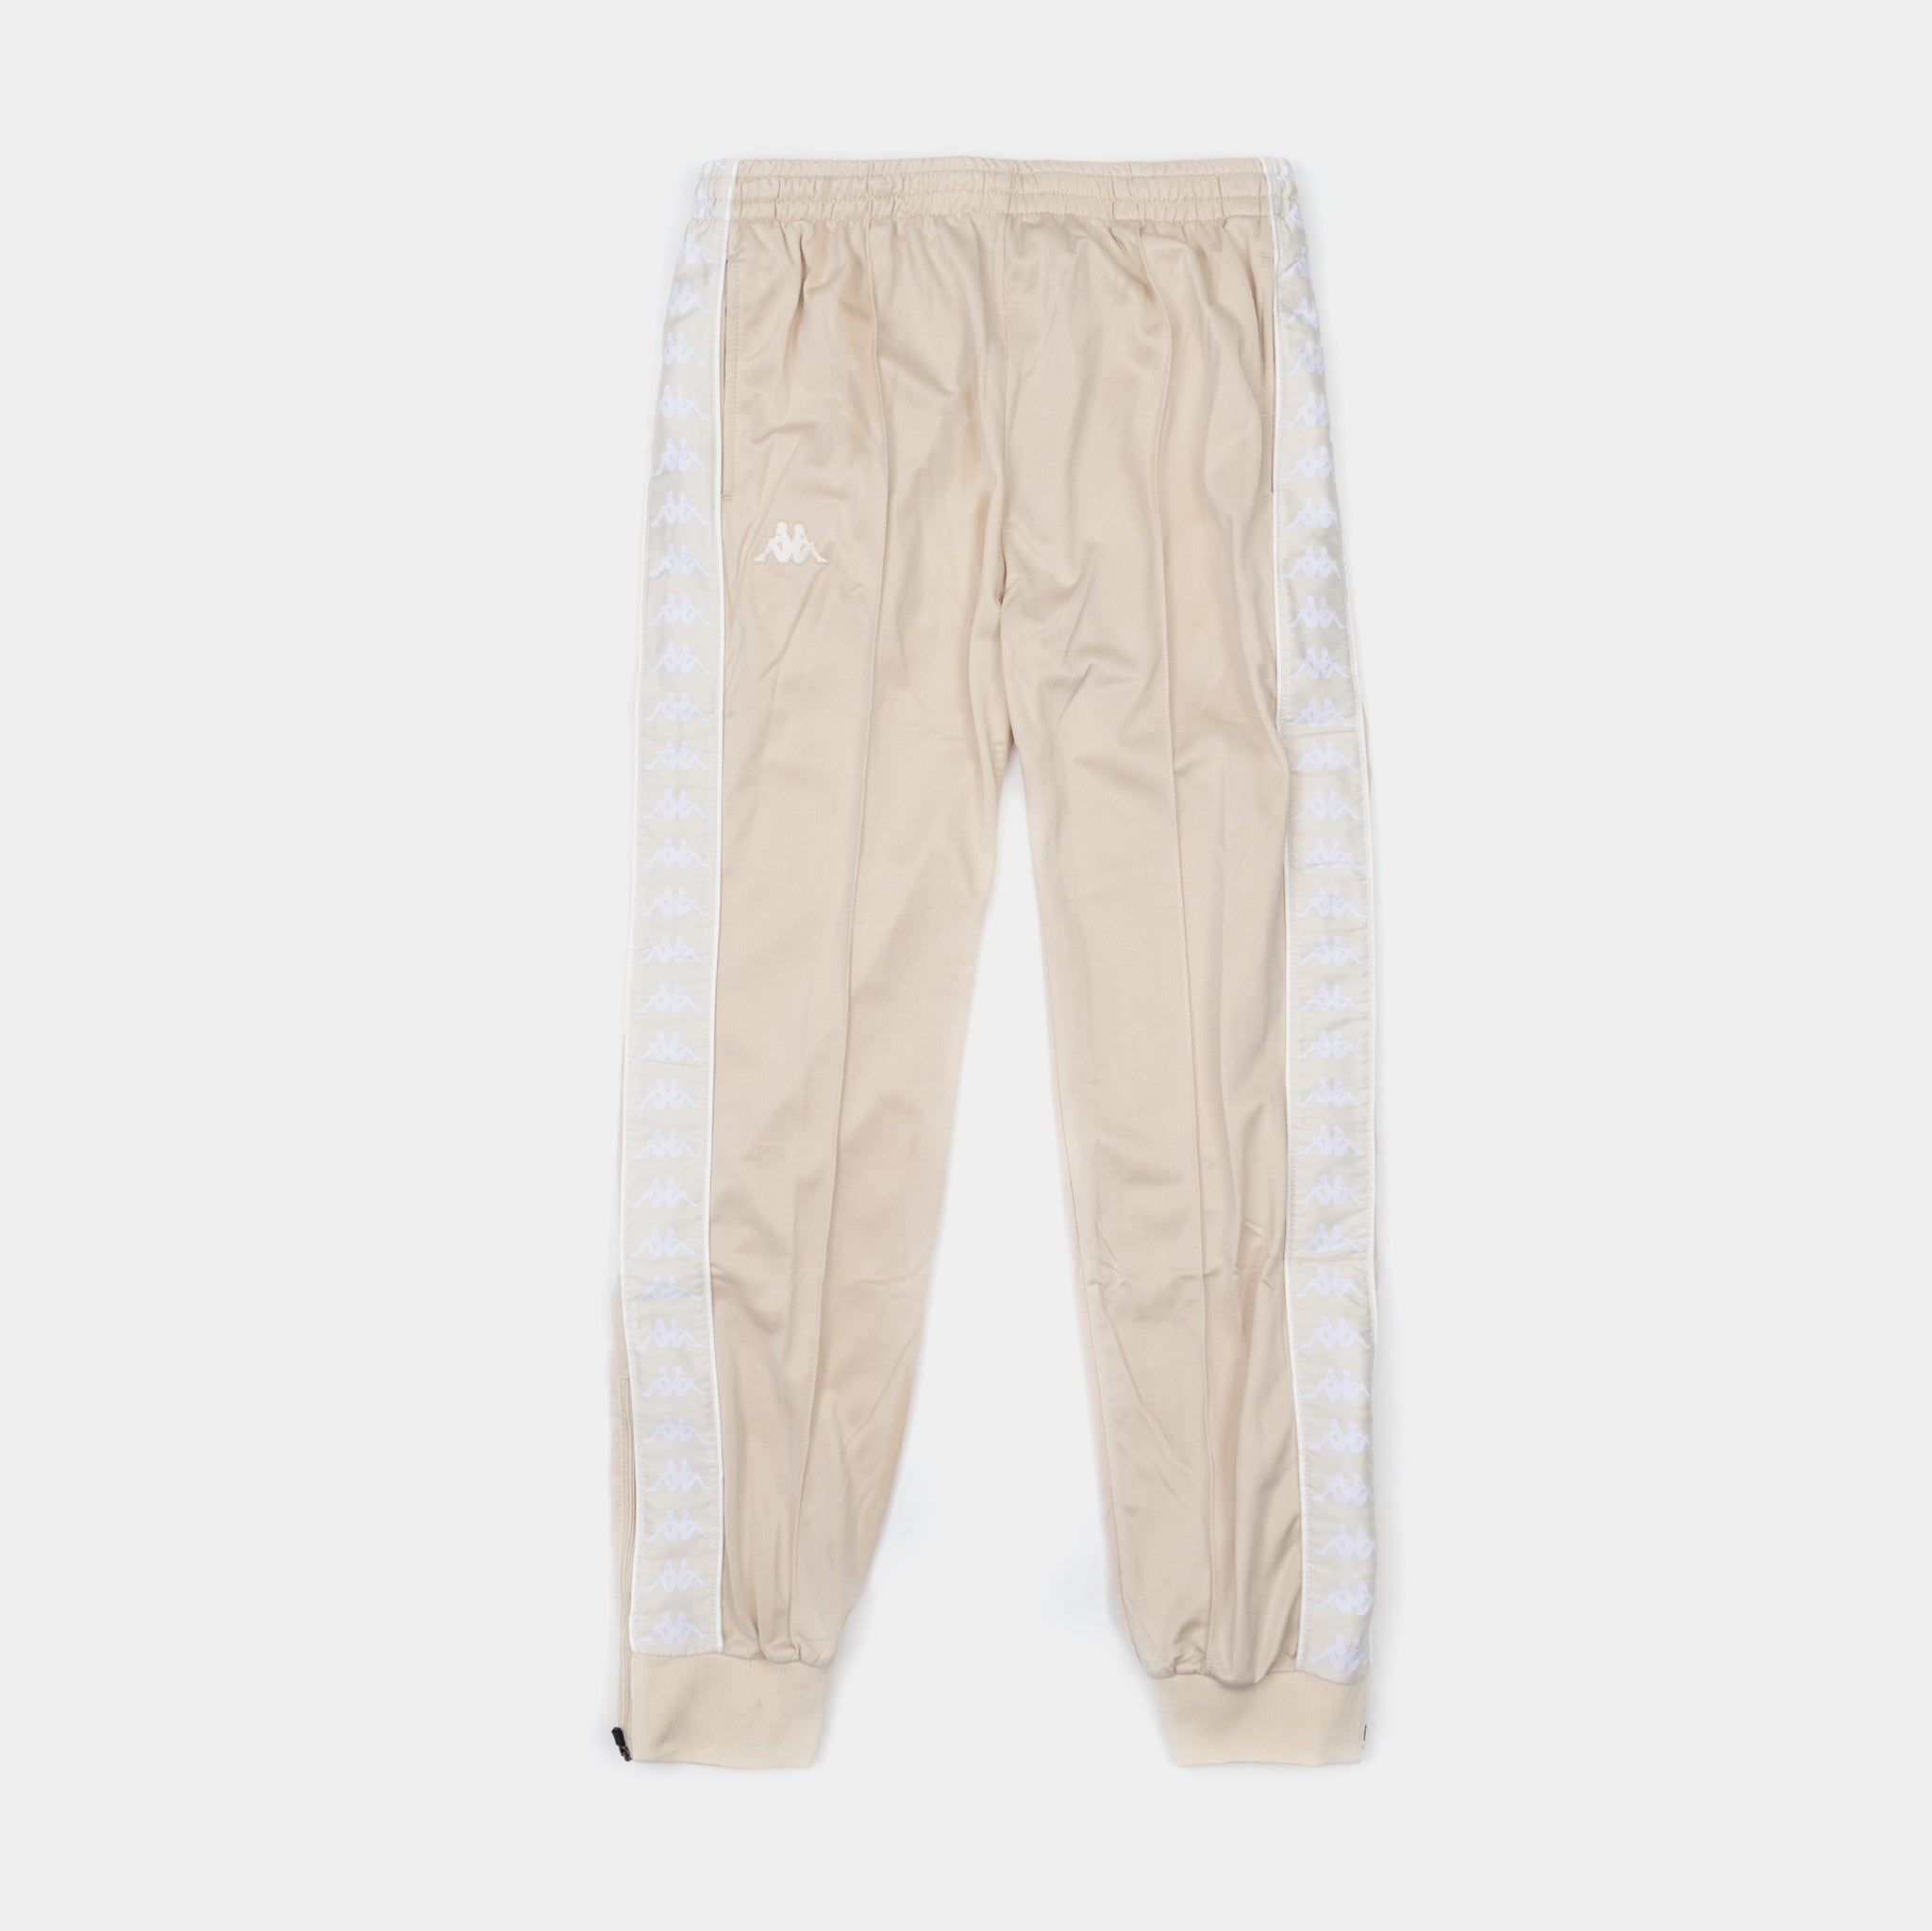 Kappa Men Off White Polyester Slim Fit Solid Track Pants_Off White_XXL :  Amazon.in: Clothing & Accessories